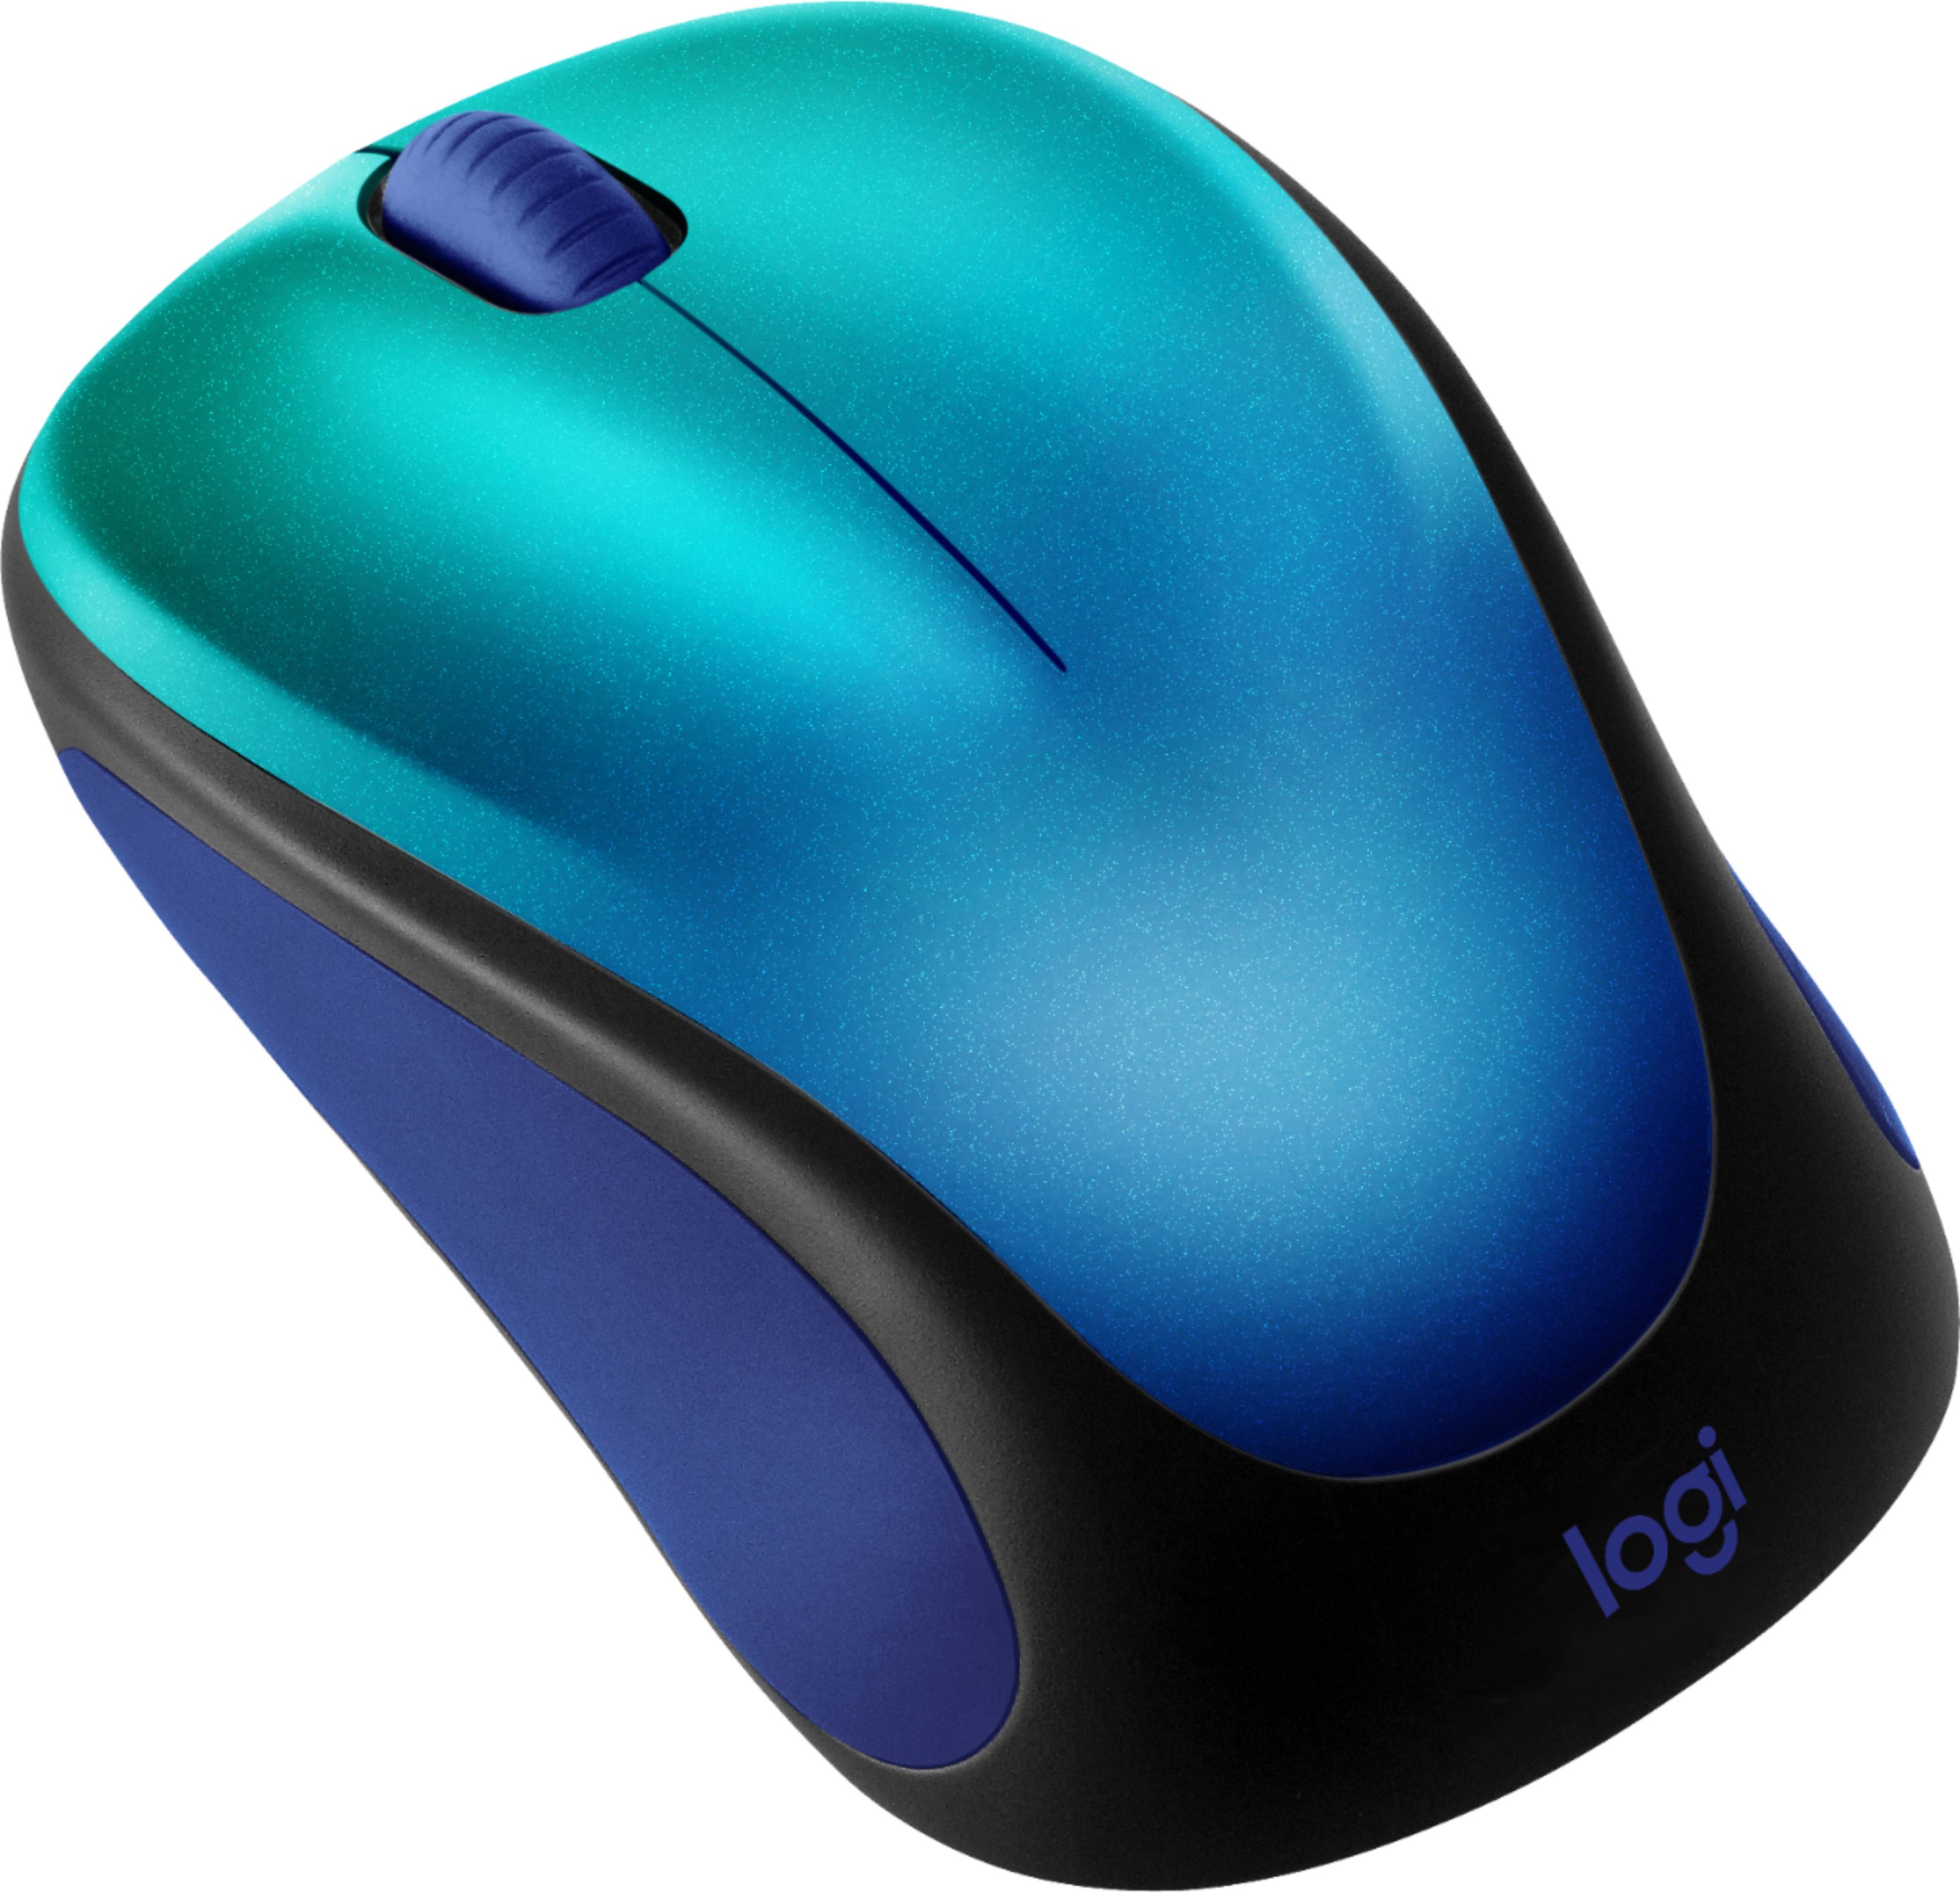 Angle View: Logitech - Design Collection Limited Edition Wireless 3-button Ambidextrous Mouse with Colorful Designs - Blue Aurora